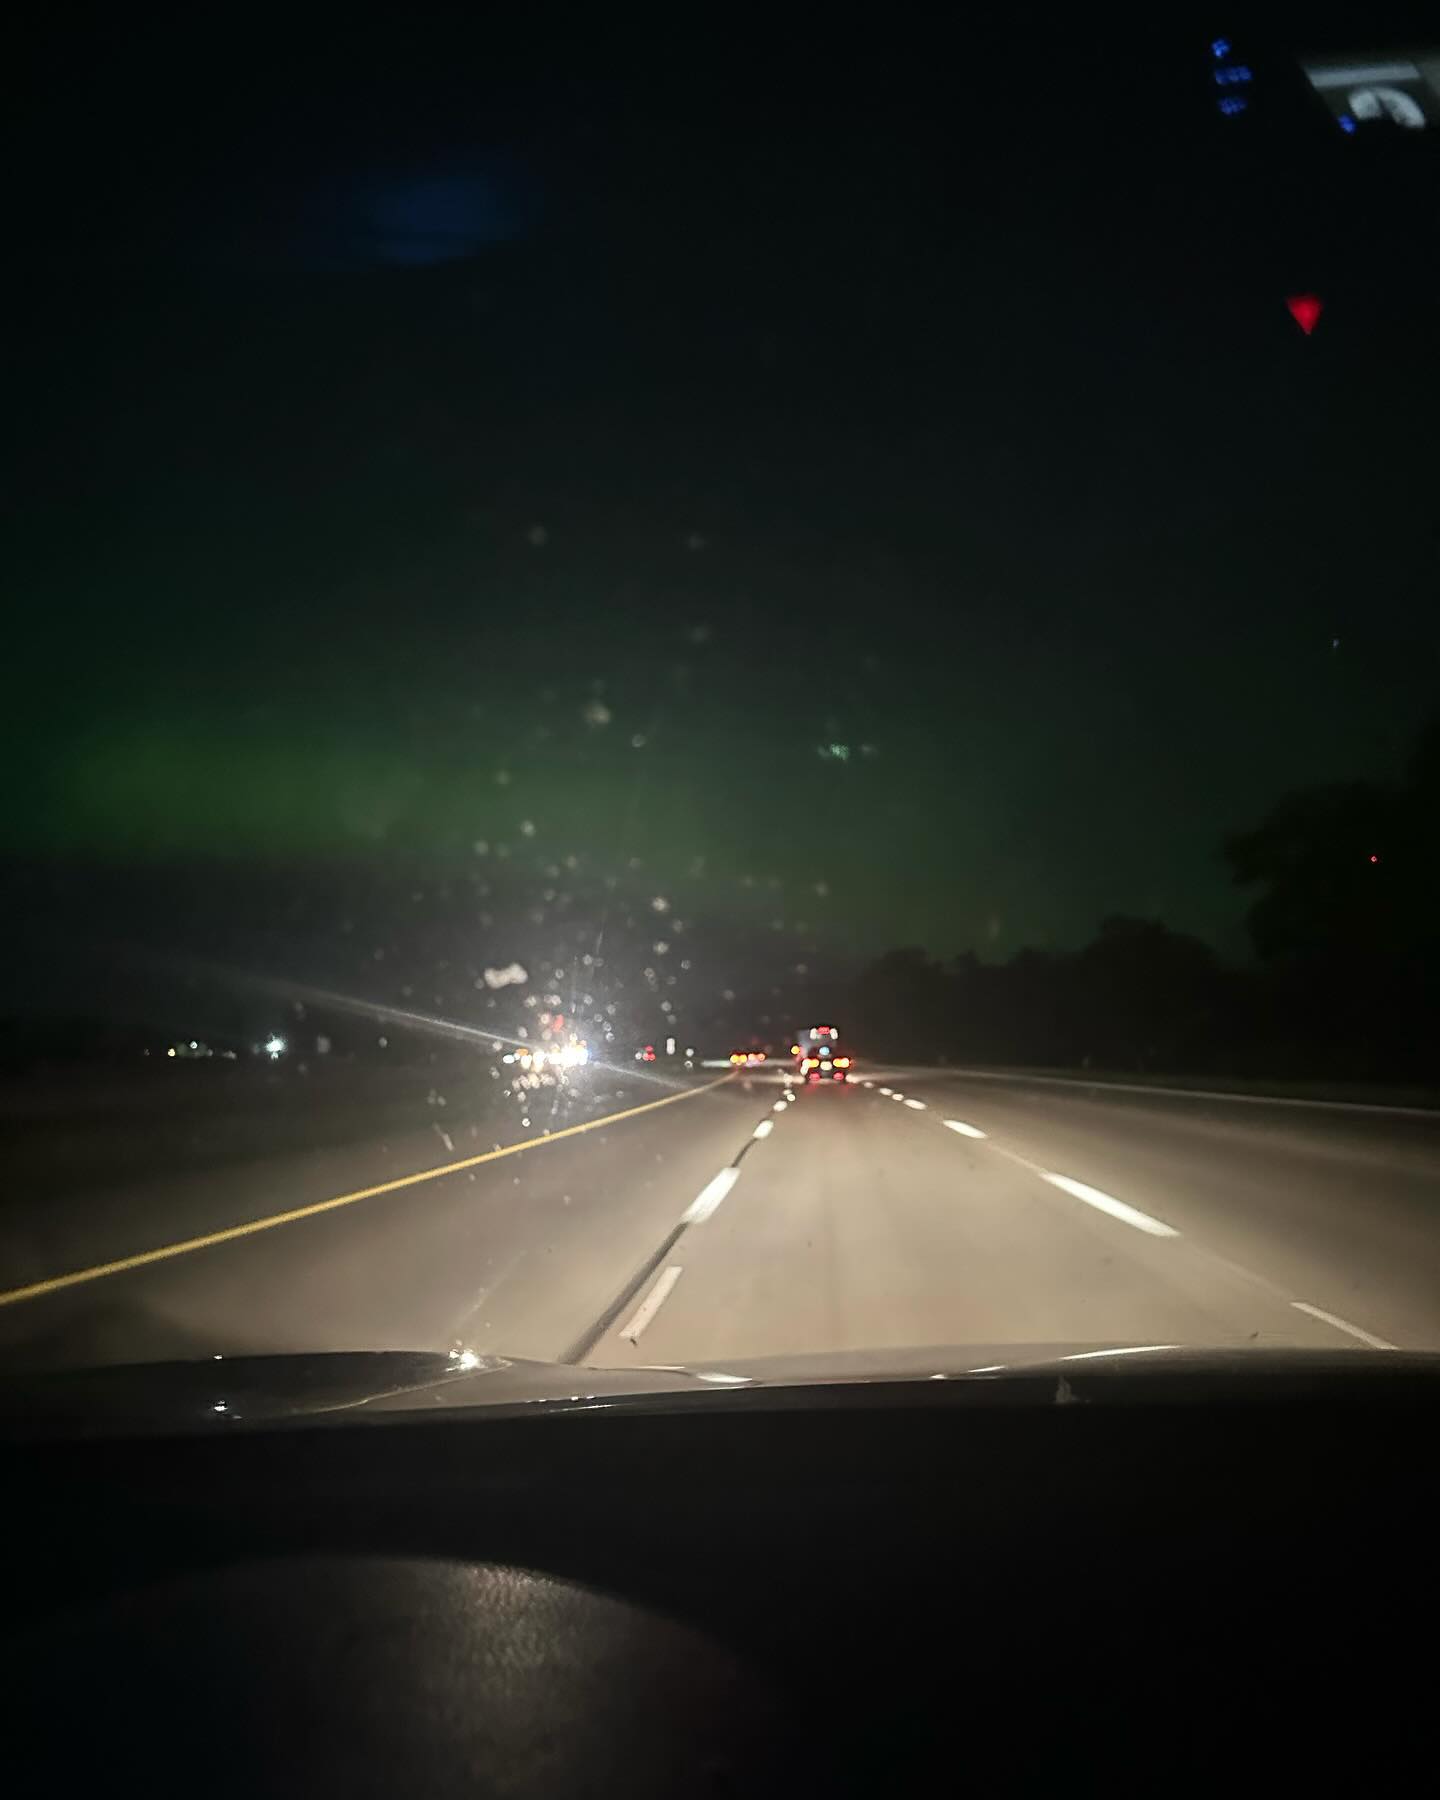 So lucky to have seen the northern lights tonight